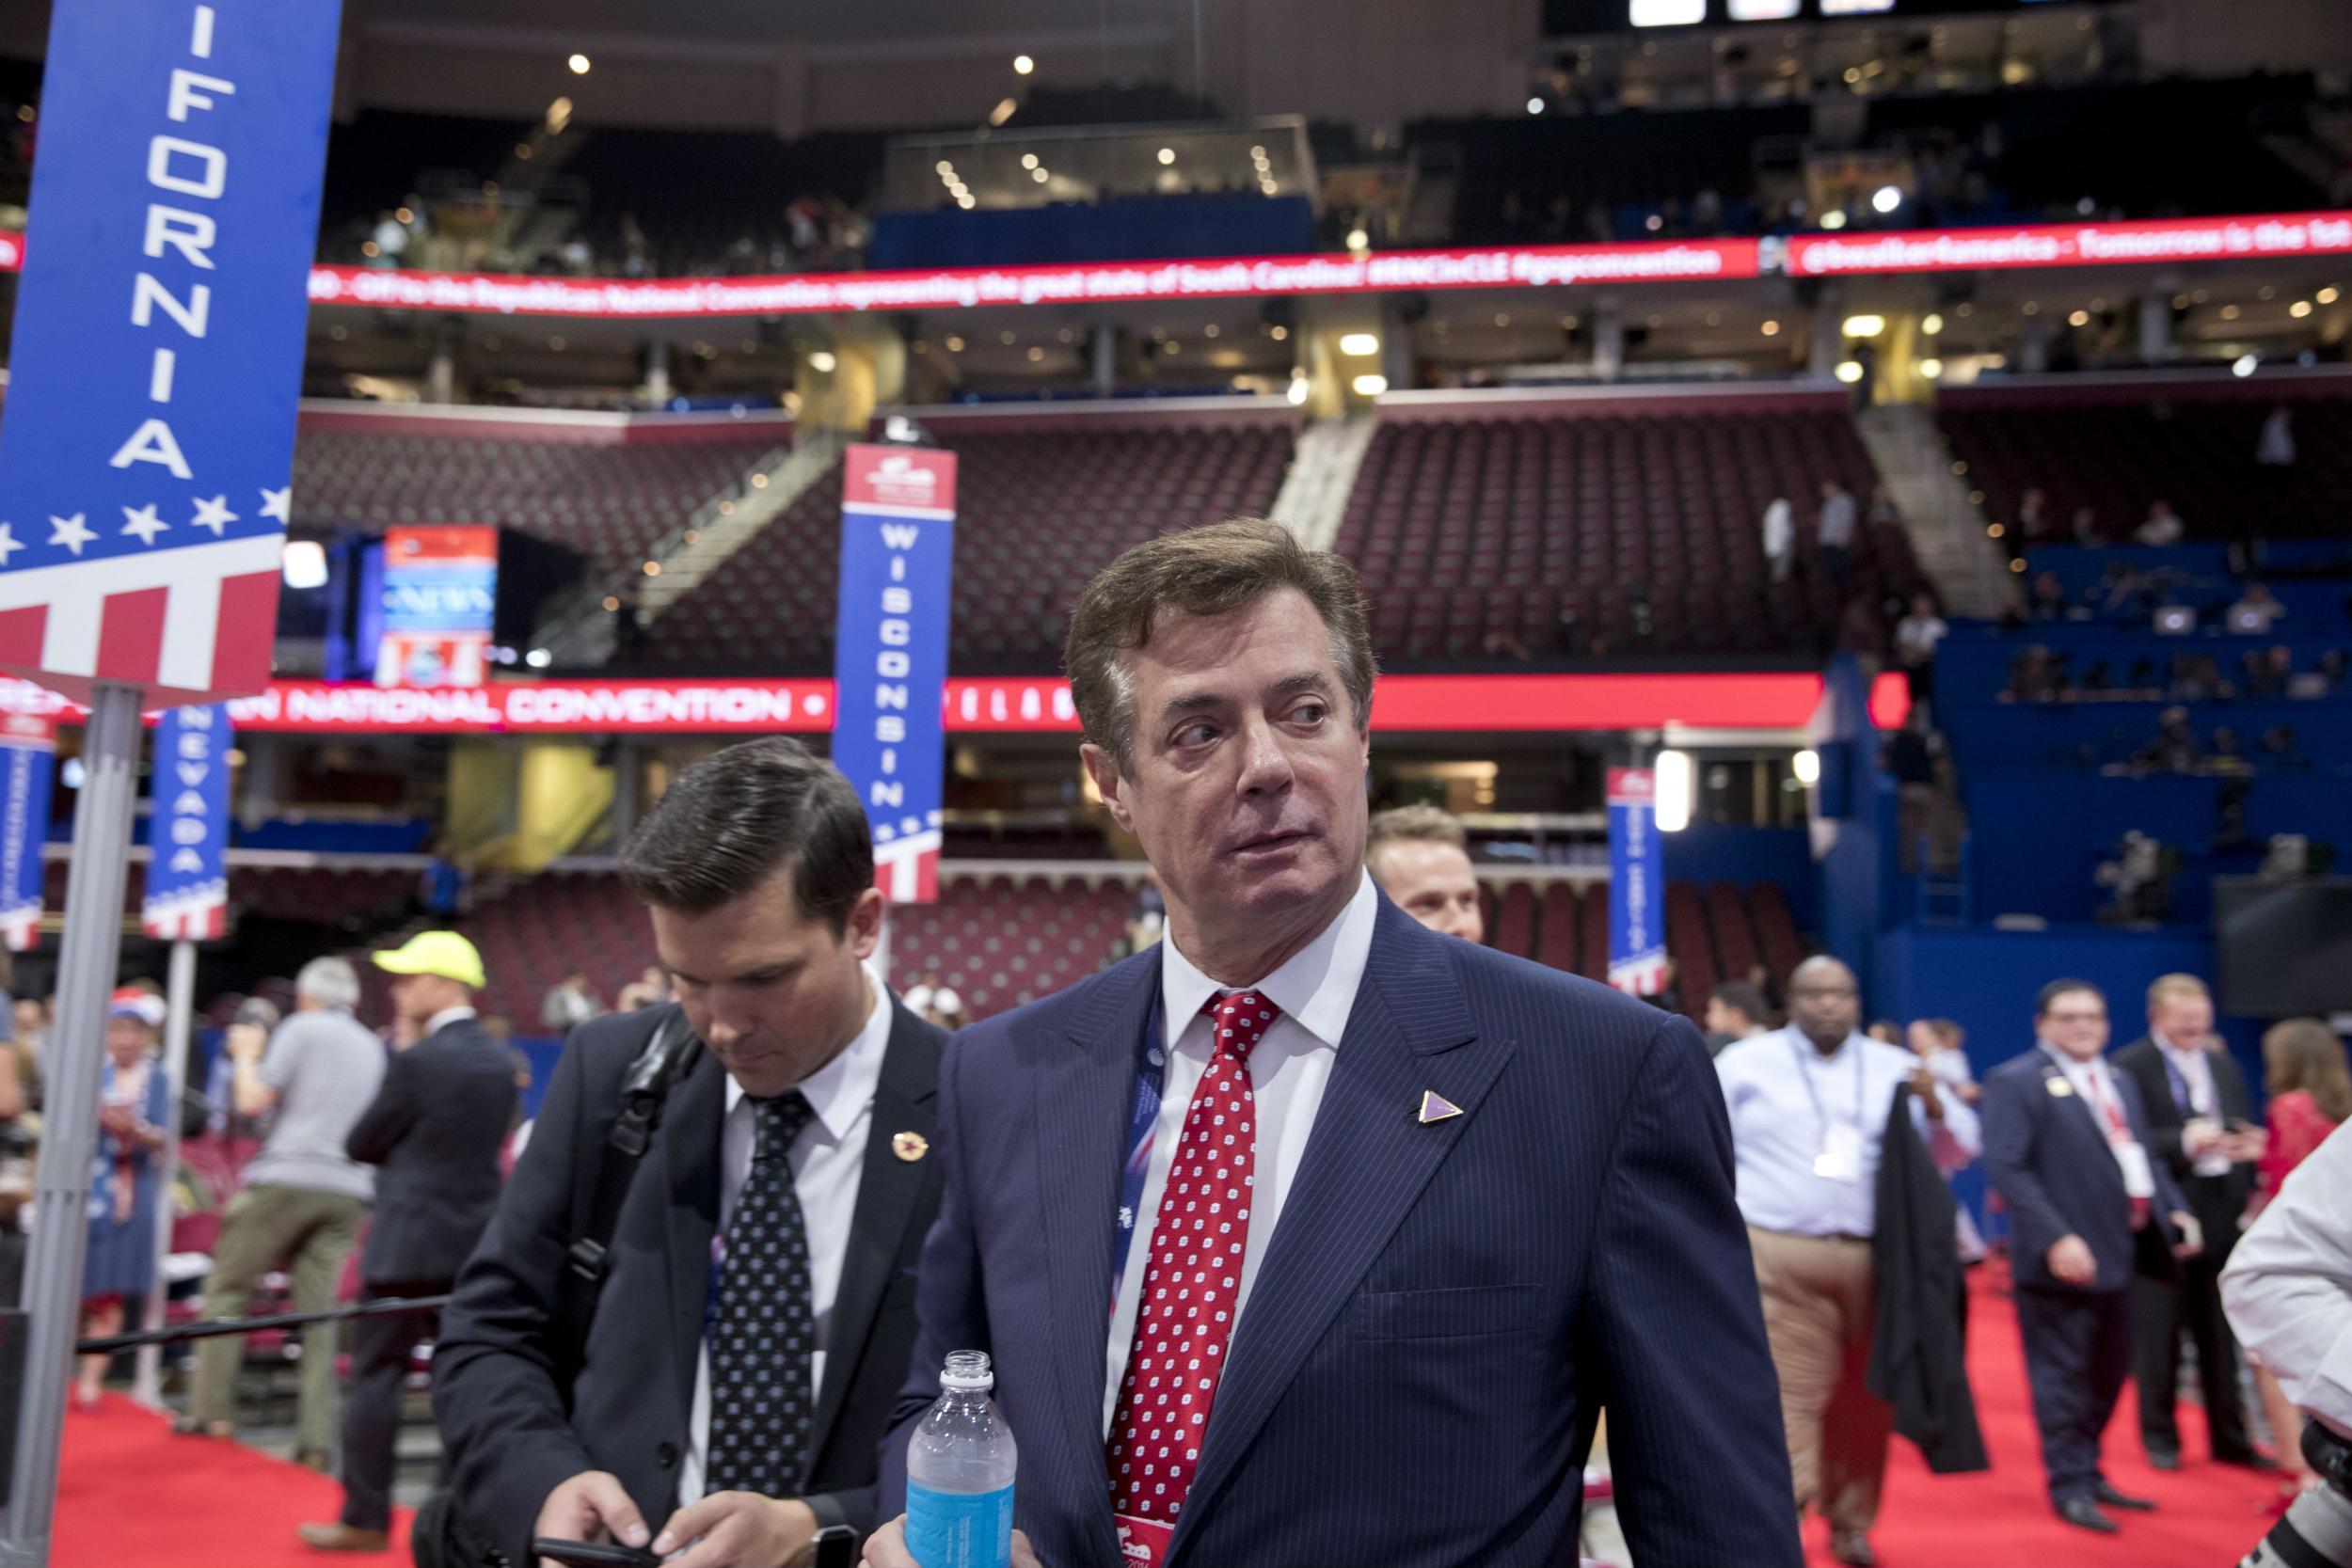 Paul Manafort is under investigation by several government agencies for his ties to Ukraine president Viktor Yanukovych